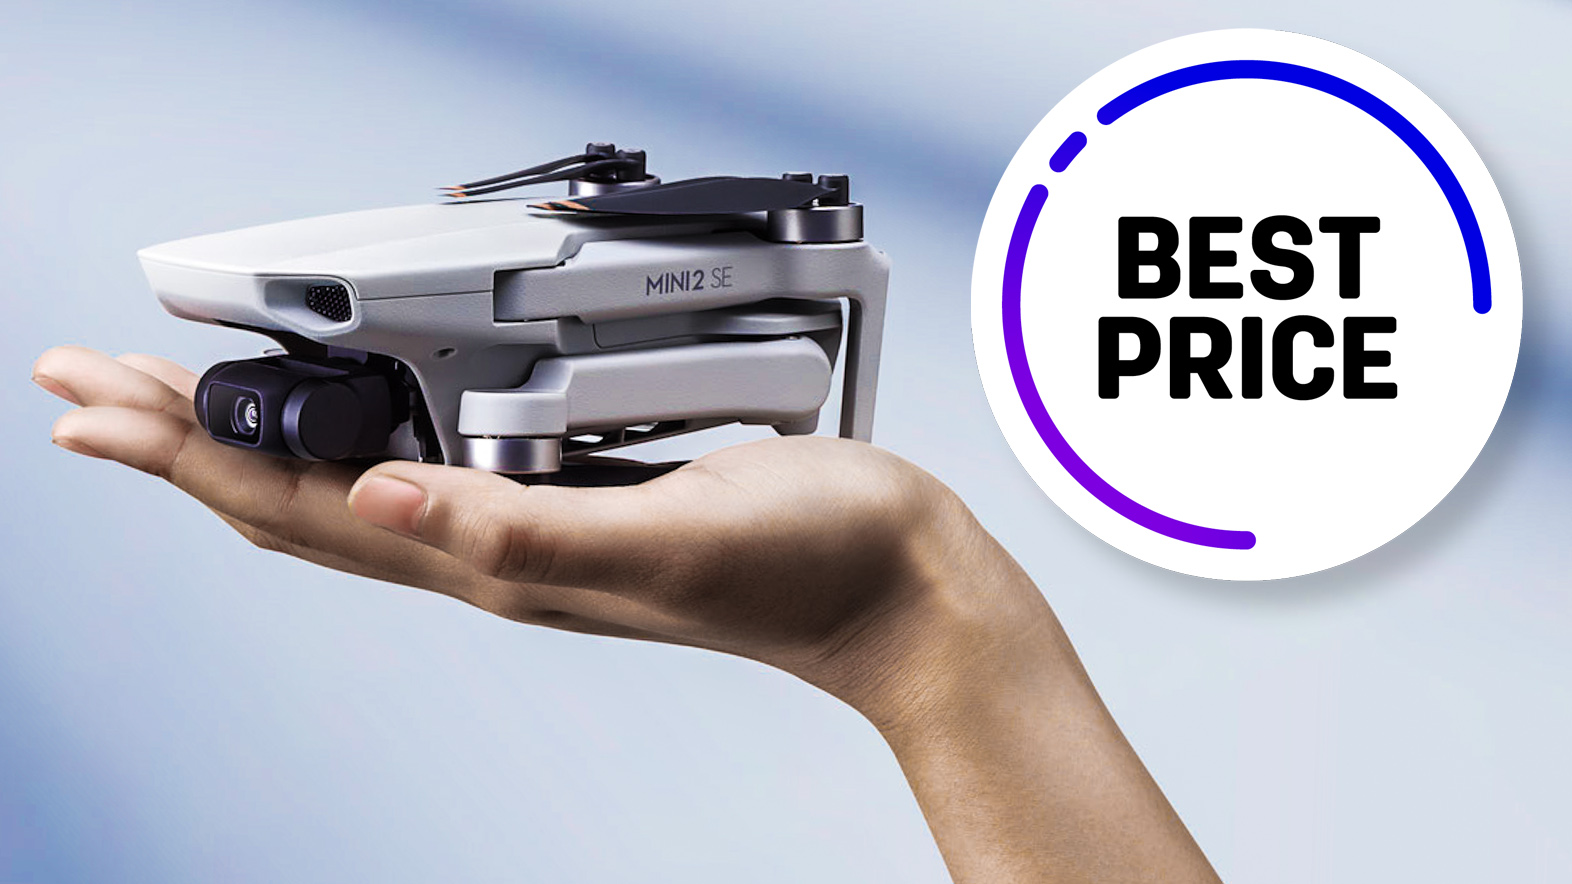 Budget-busting DJI Mini 2 SE camera drone drops to best price ever!